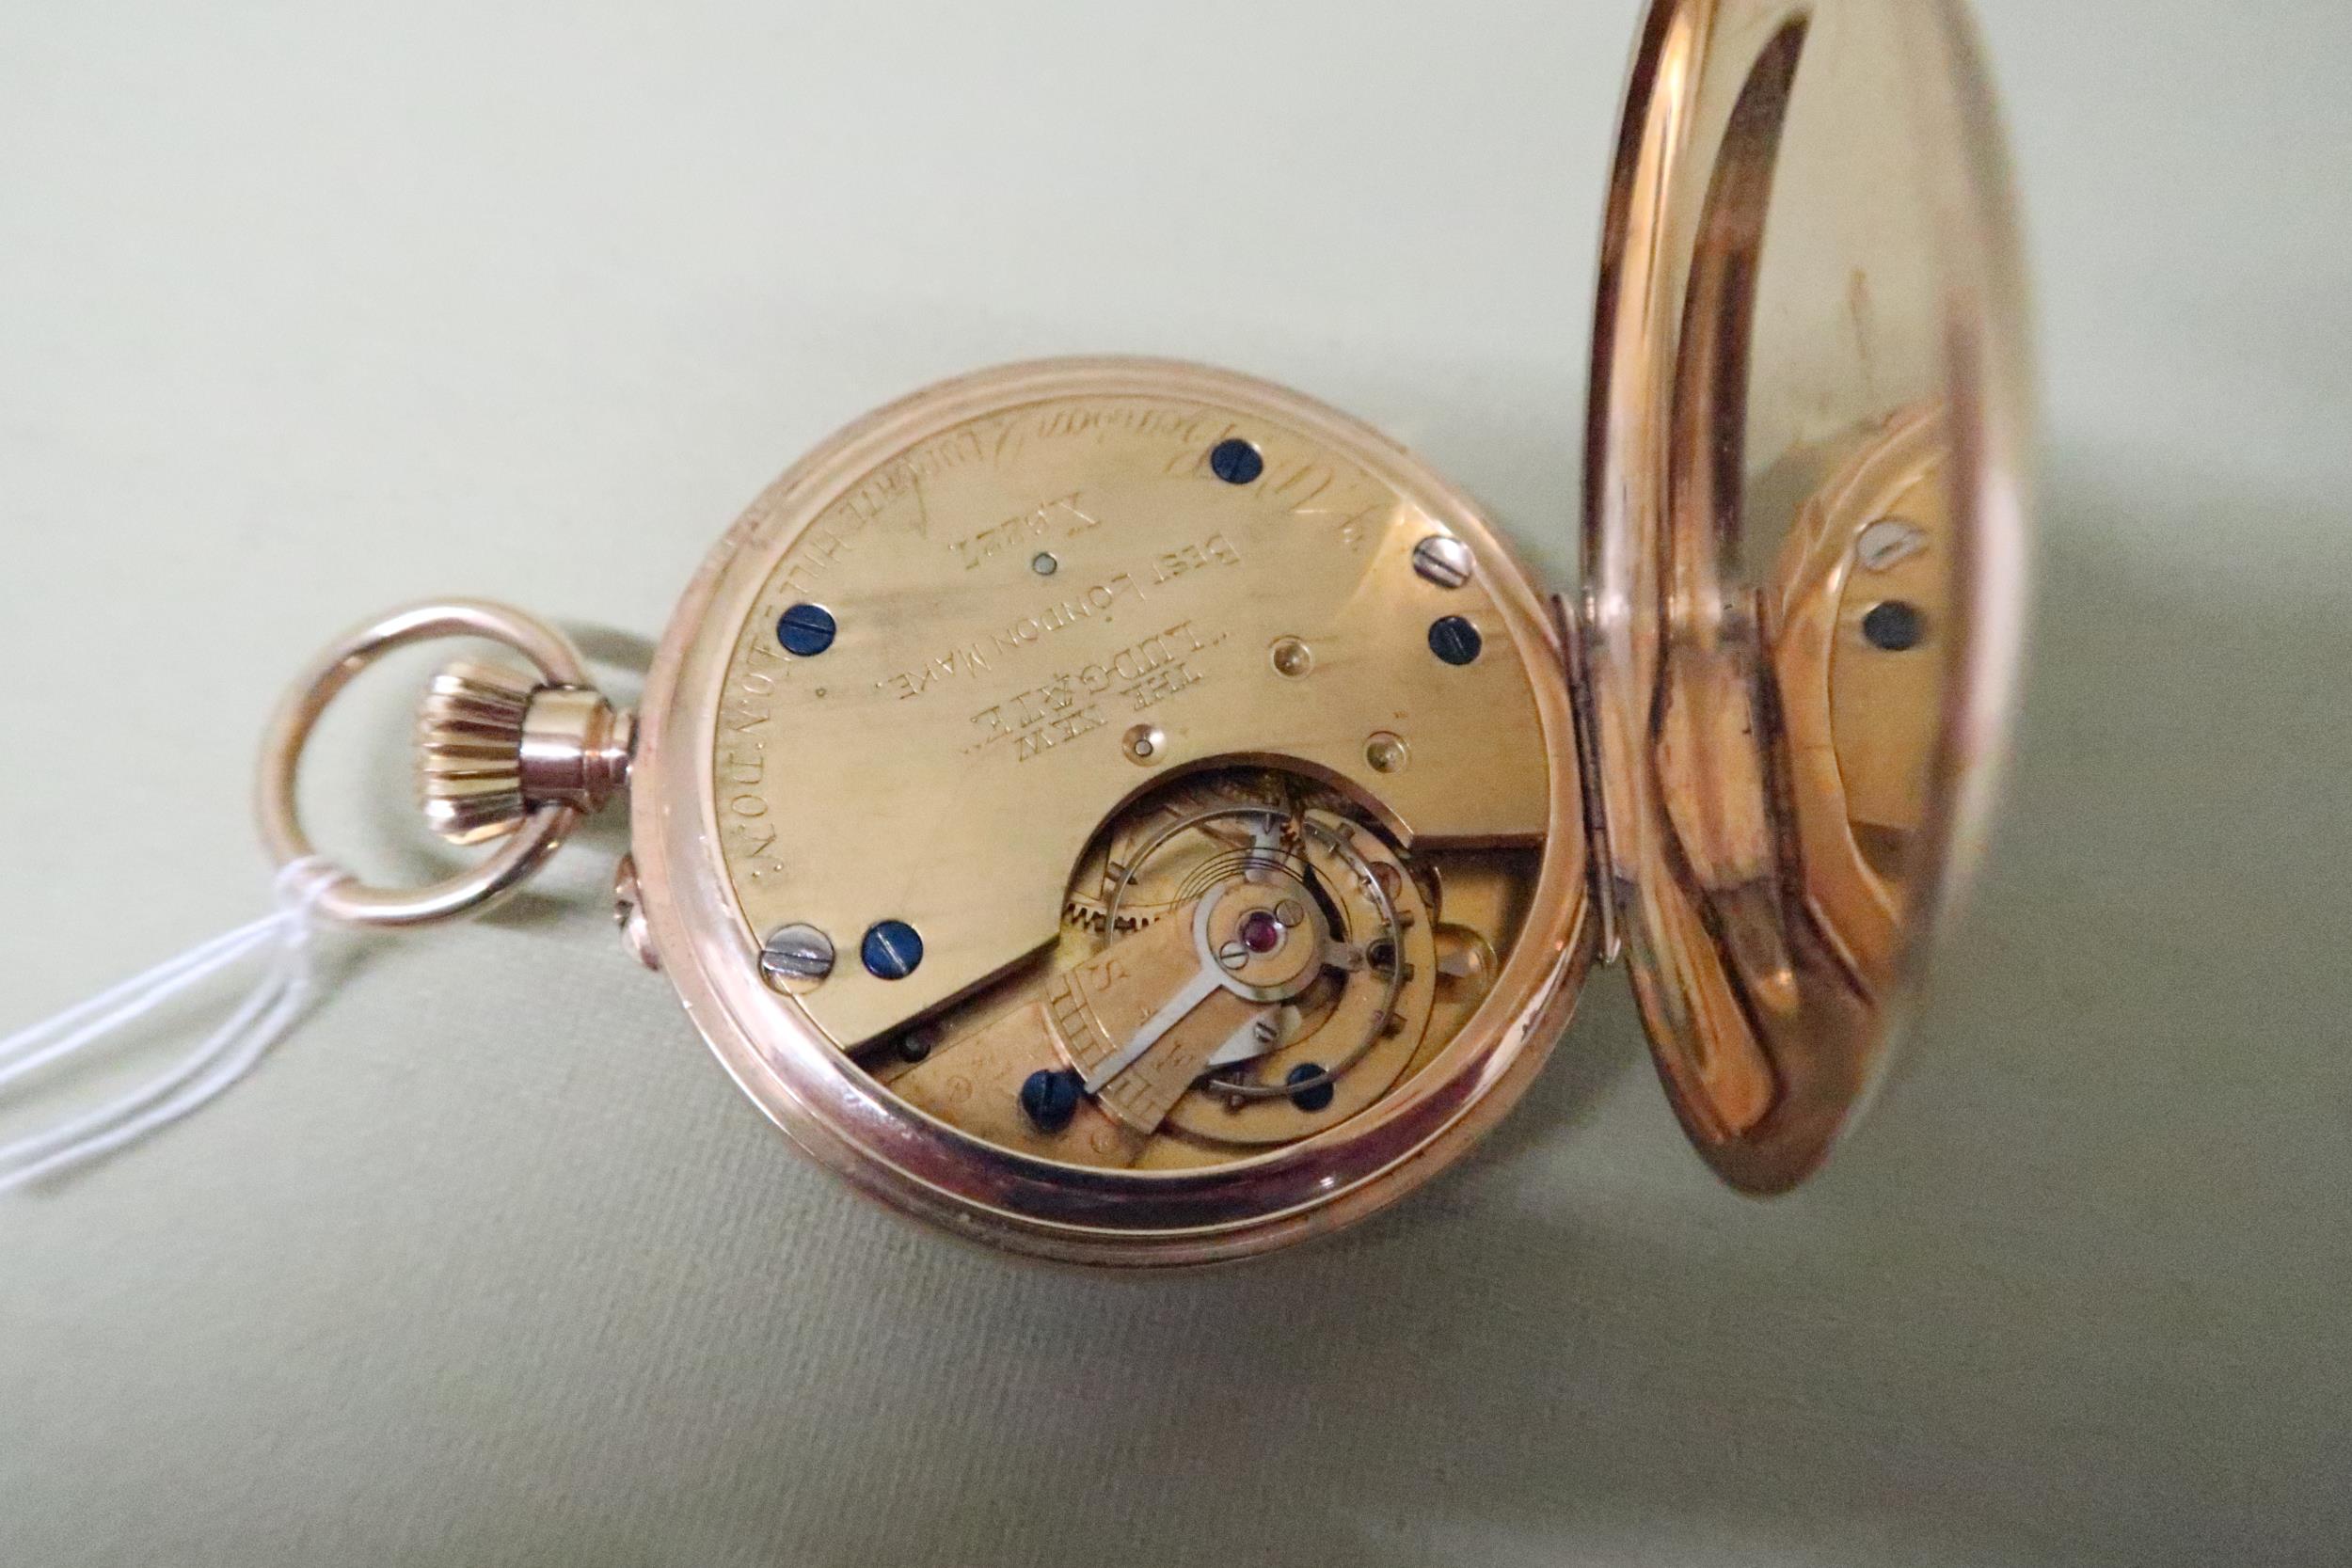 A 9ct gold pocket watch JW Benson 1873 - Roman numerals X6227 The New Ludgate - subsidiary seconds - Bild 2 aus 3